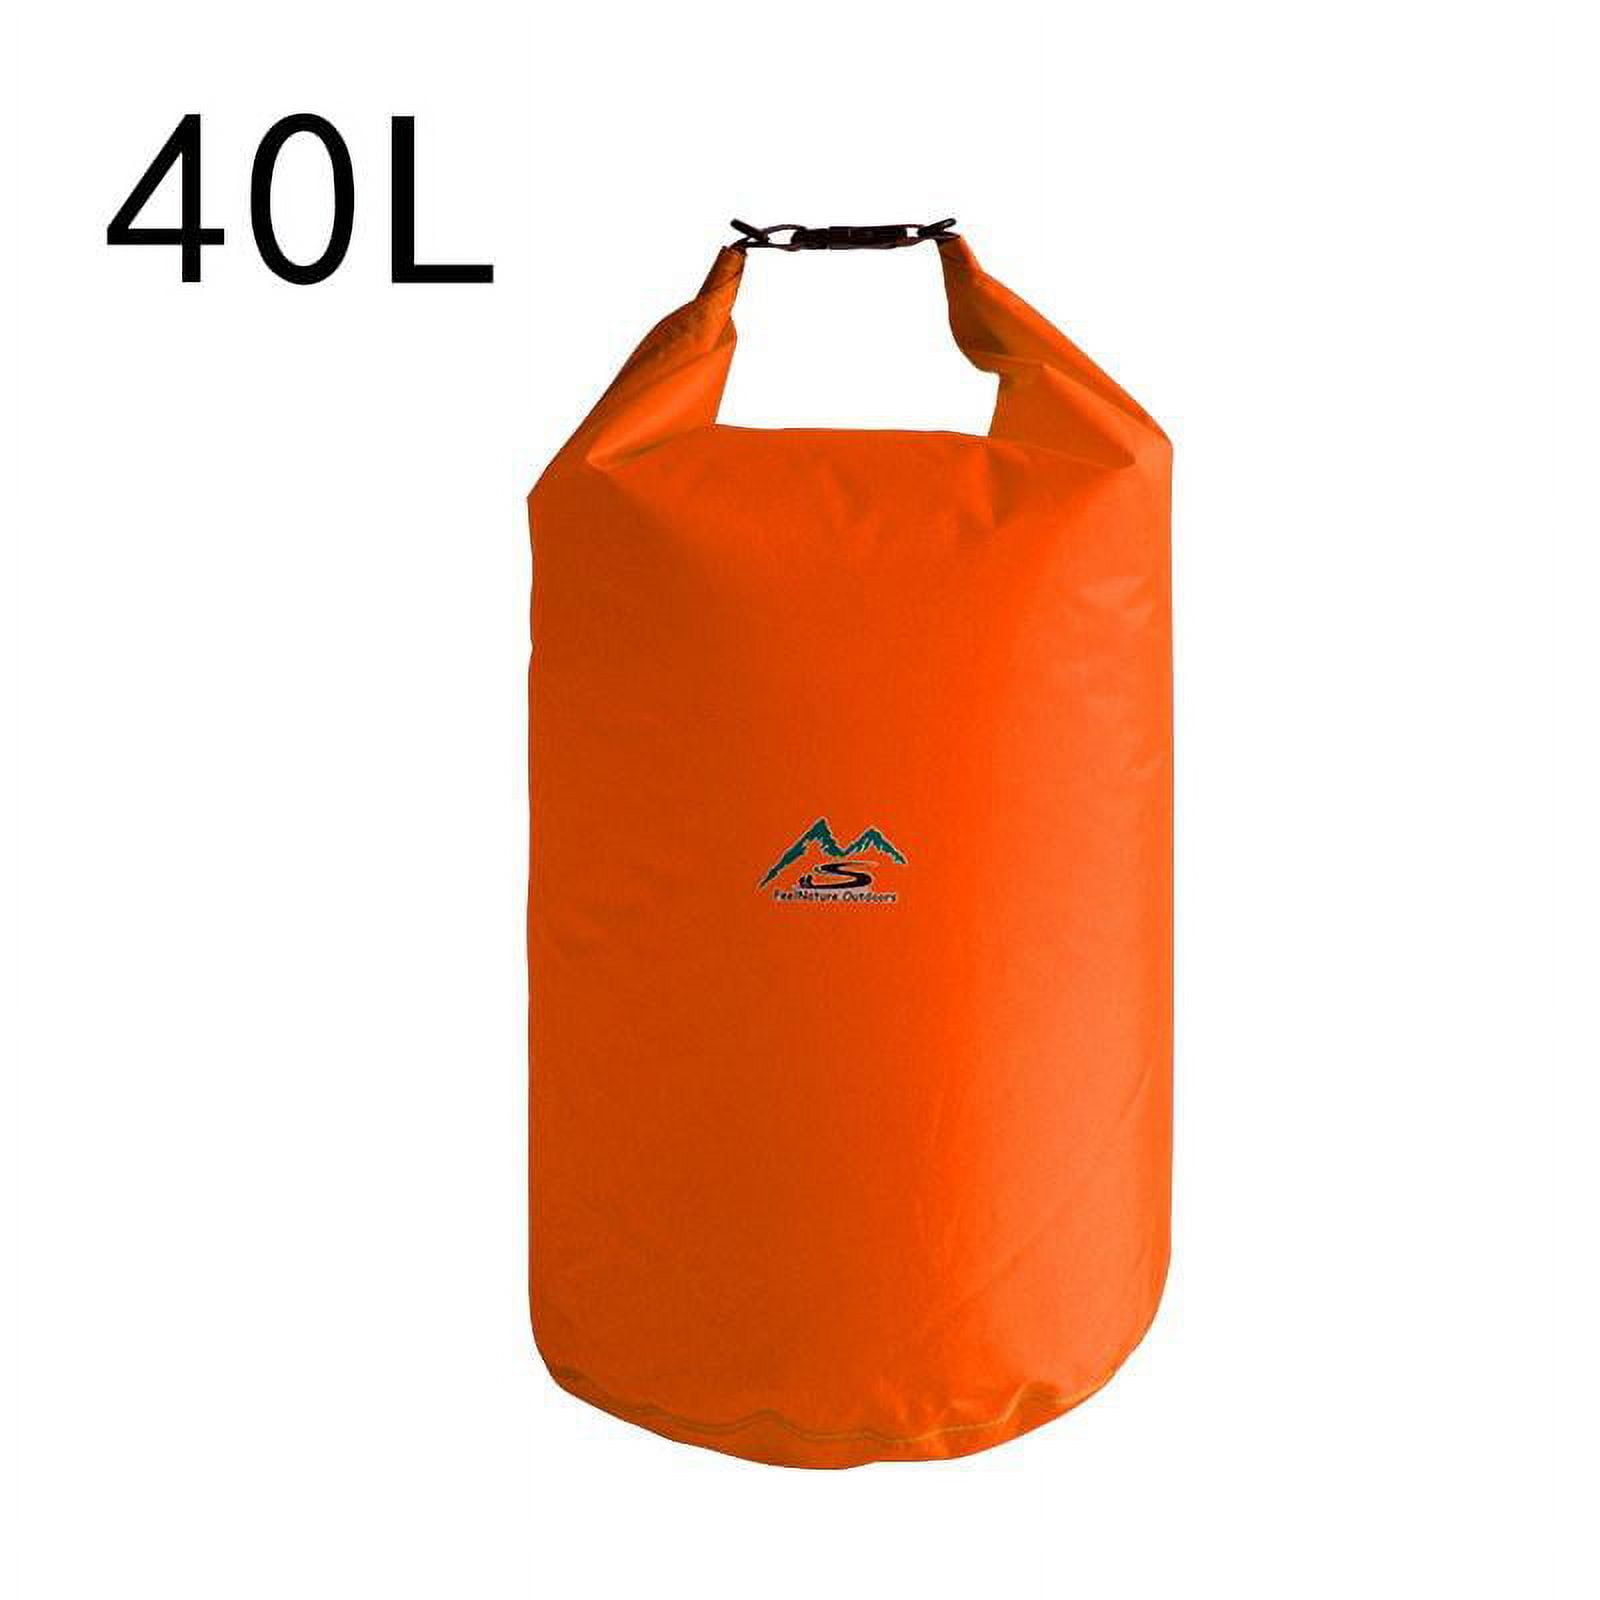 Floating Waterproof Dry Bag 5L/10L/20L/40L/70L, Roll Top Sack Keeps Gear  Dry for Kayaking, Rafting, Boating, Swimming, Camping, Hiking, Beach,  Fishing